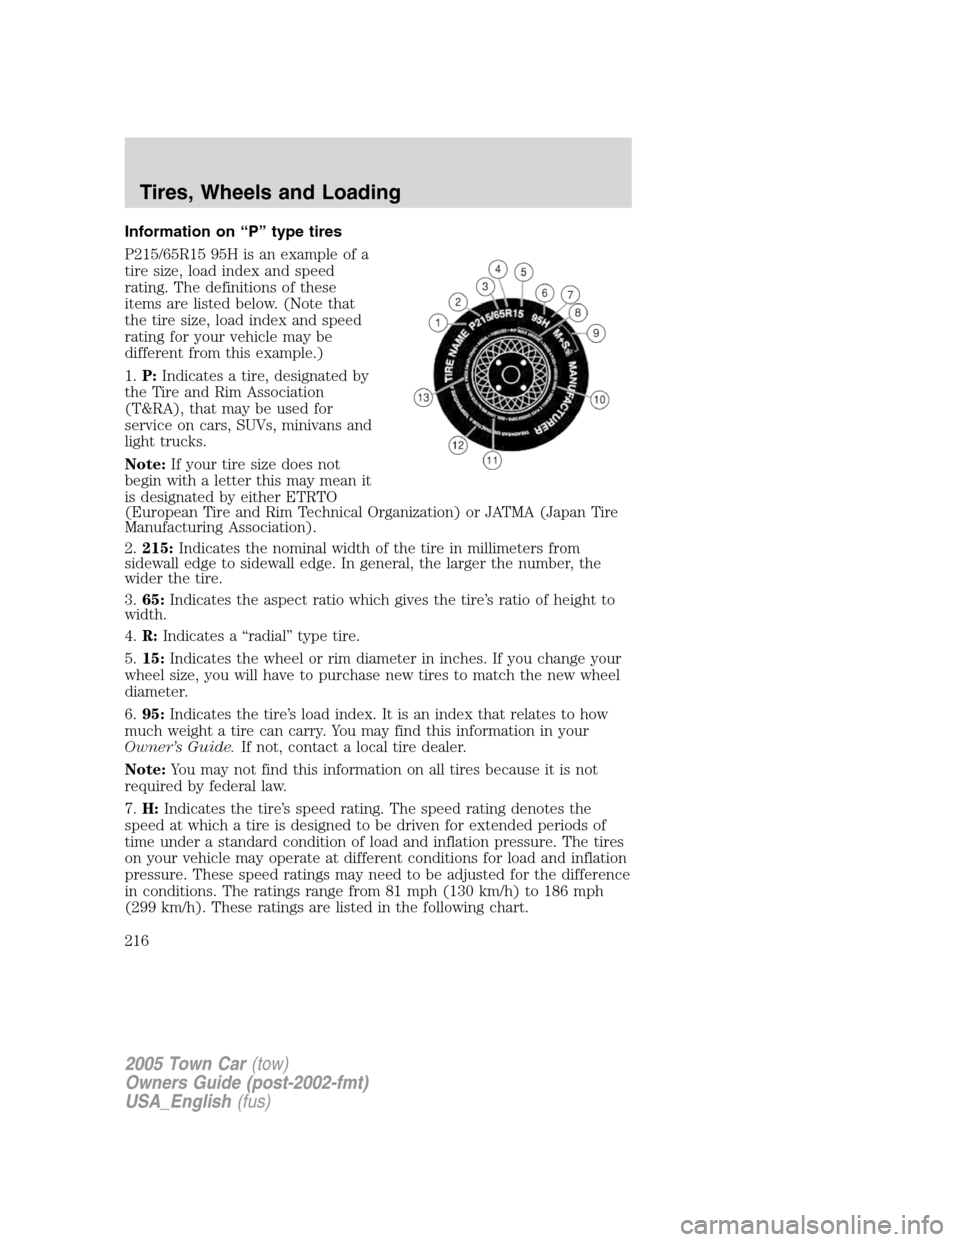 LINCOLN TOWN CAR 2005  Owners Manual Information on “P” type tires
P215/65R15 95H is an example of a
tire size, load index and speed
rating. The definitions of these
items are listed below. (Note that
the tire size, load index and sp